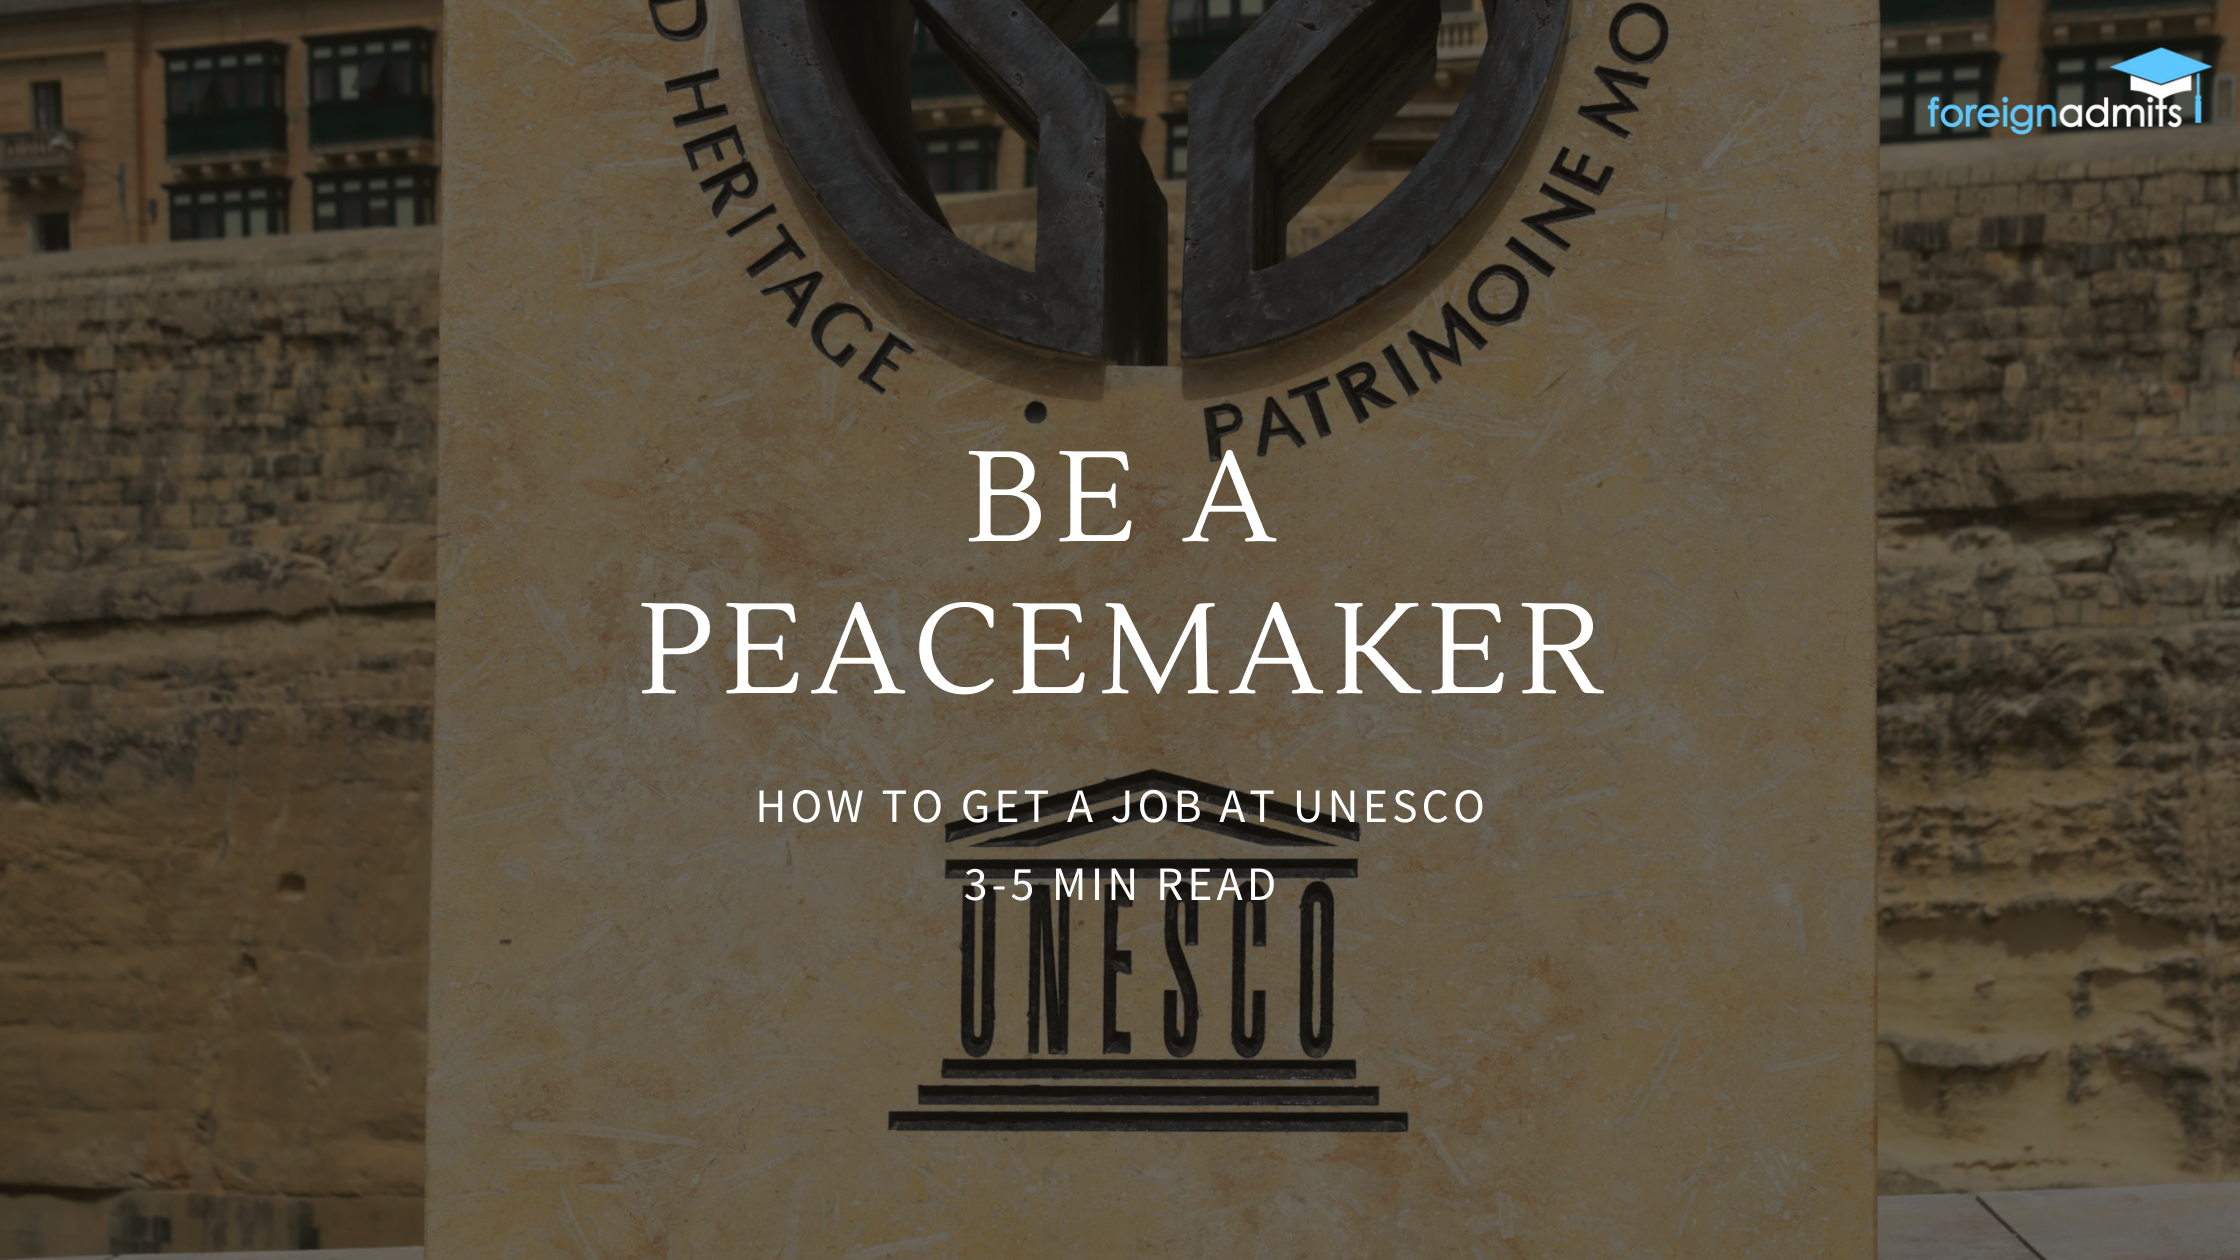 How to get a job at UNESCO?